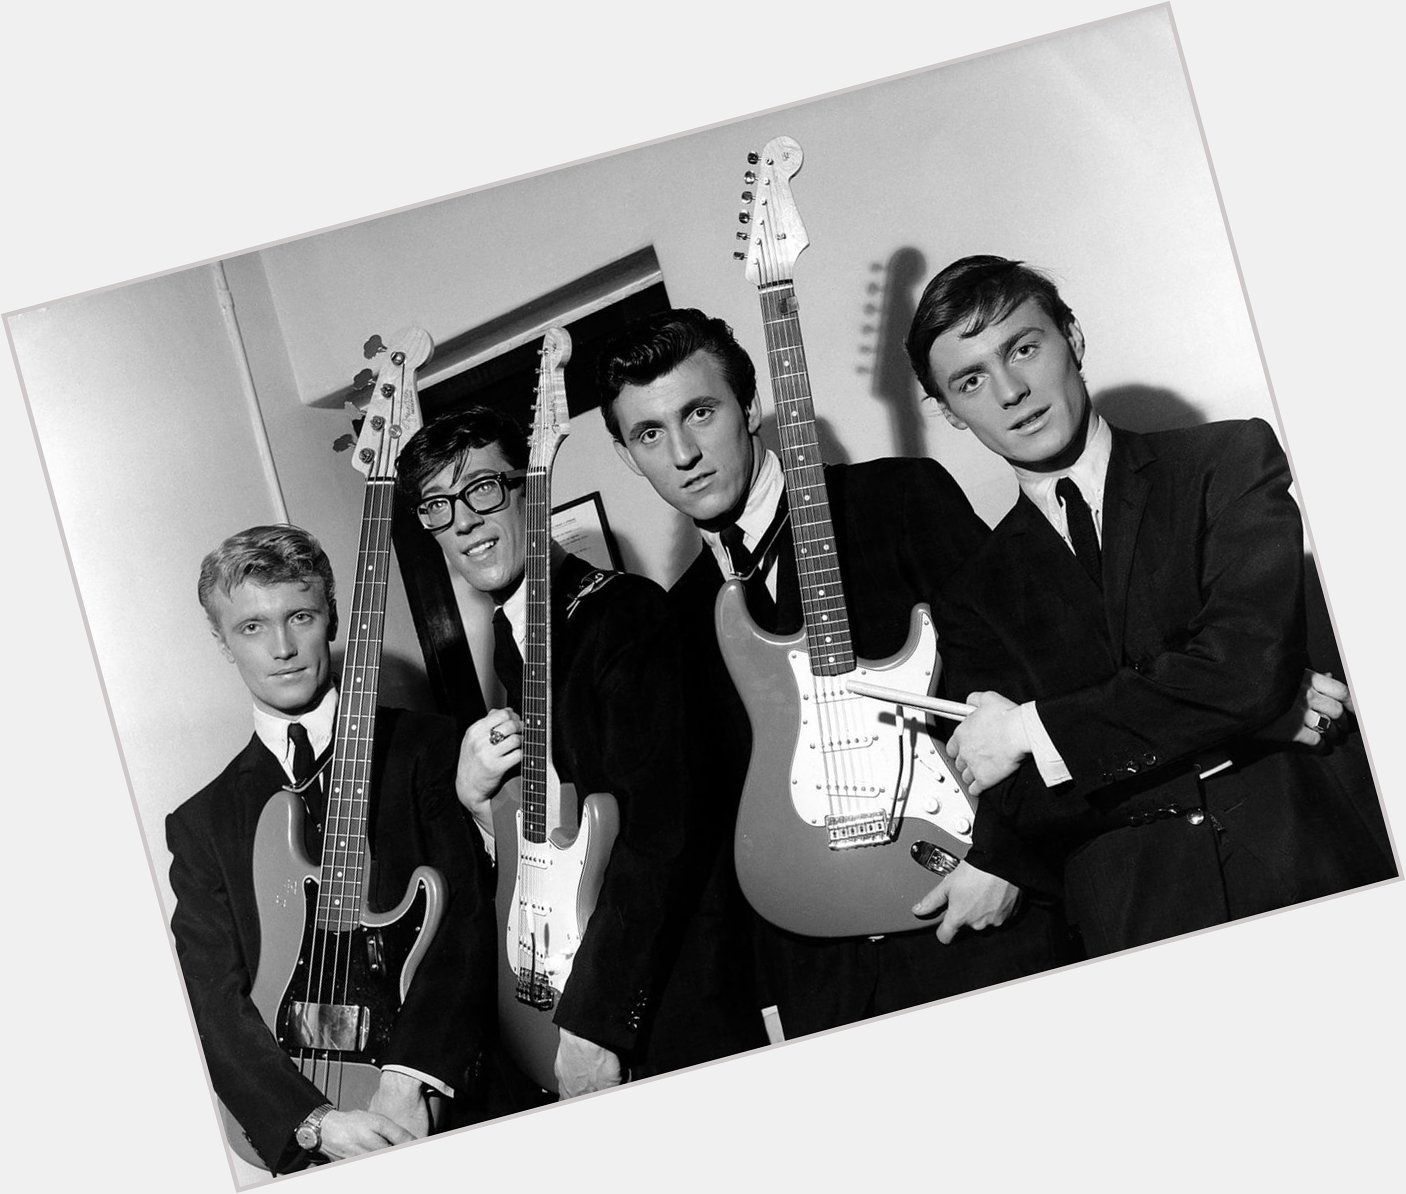 Happy 80th birthday to Bruce Welch of the Shadows. 